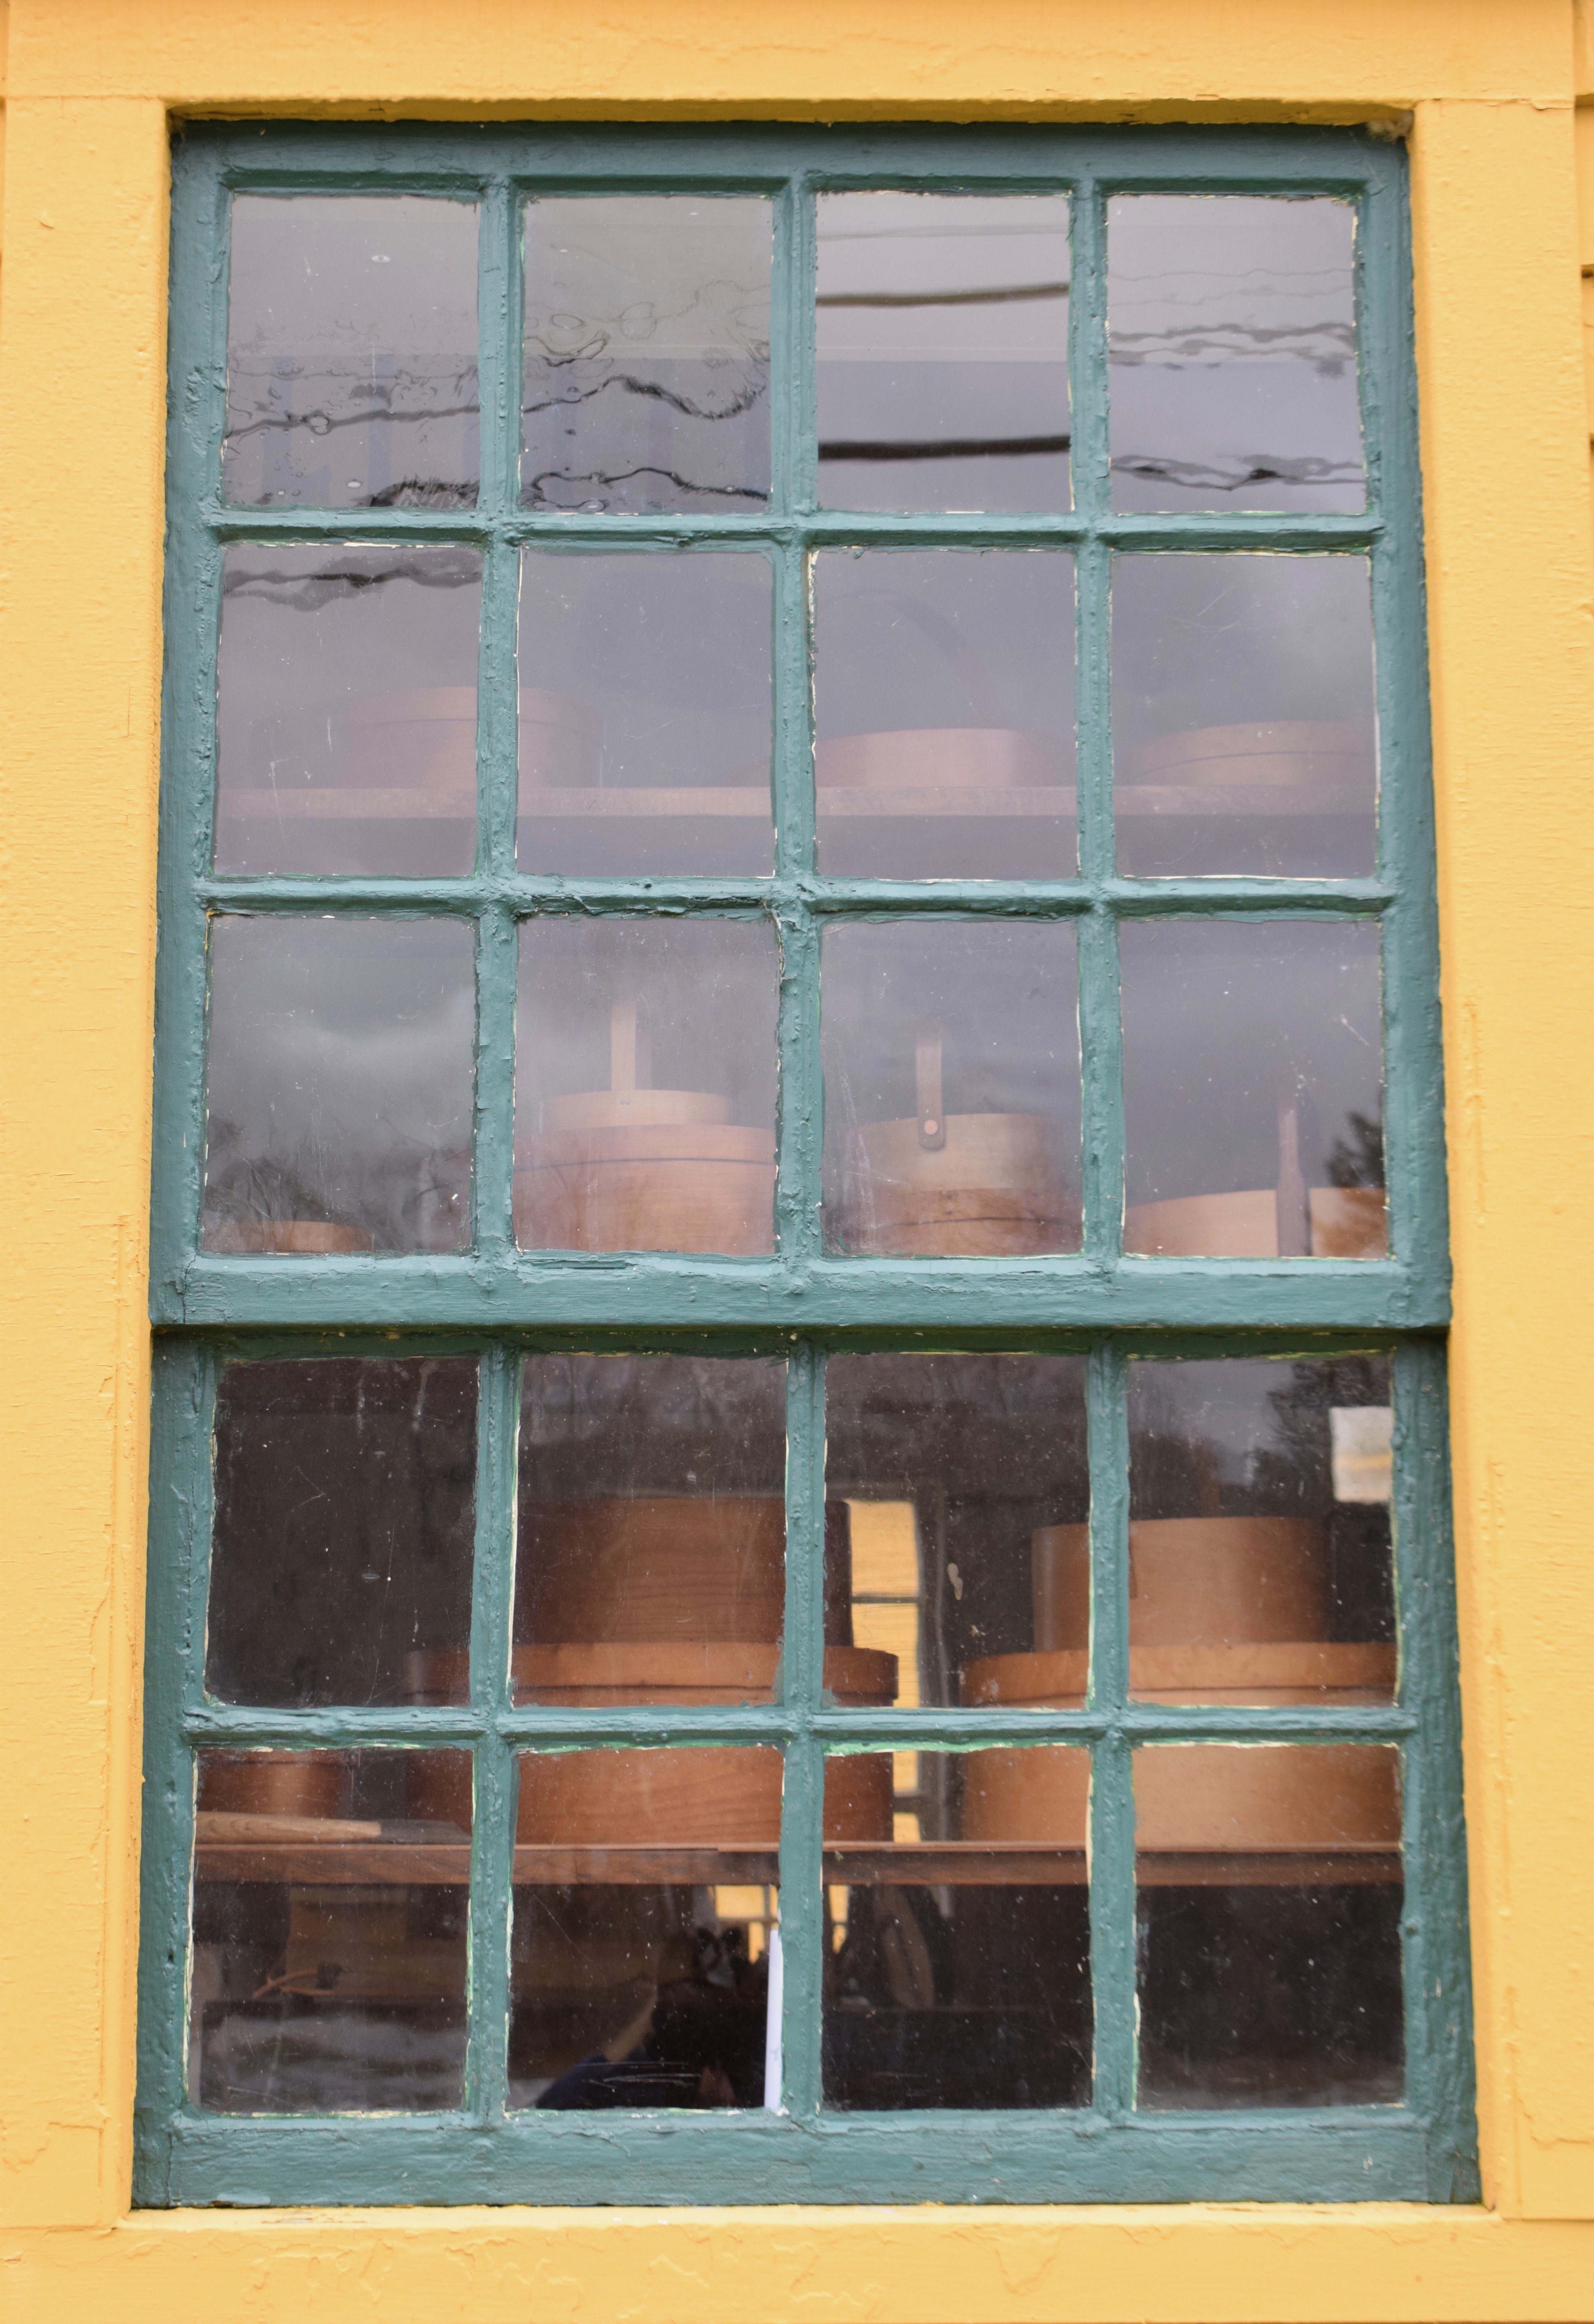 It's the weekend, number 92, Shaker Boxes in a Window